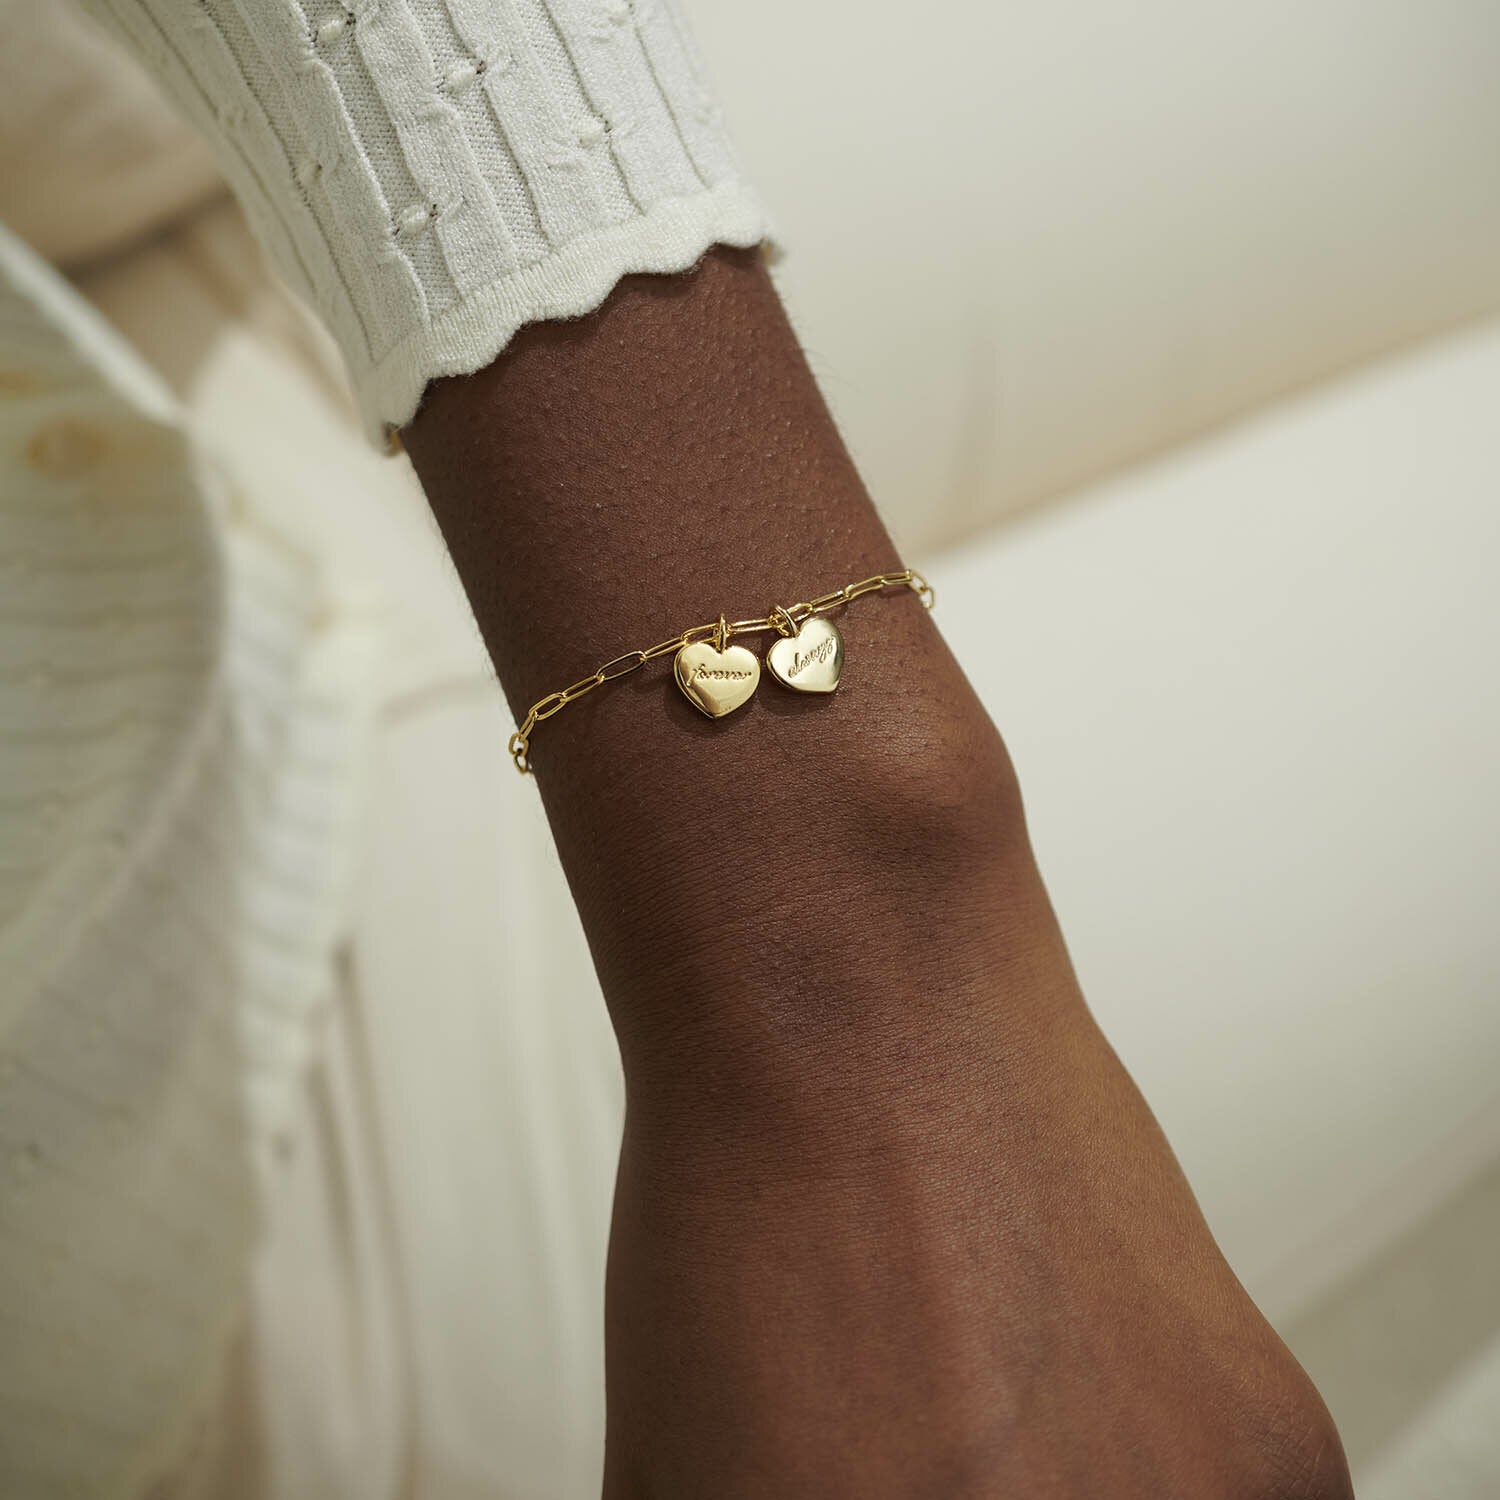 Joma Jewellery My Moments 'You Are My Forever And Always' Bracelet